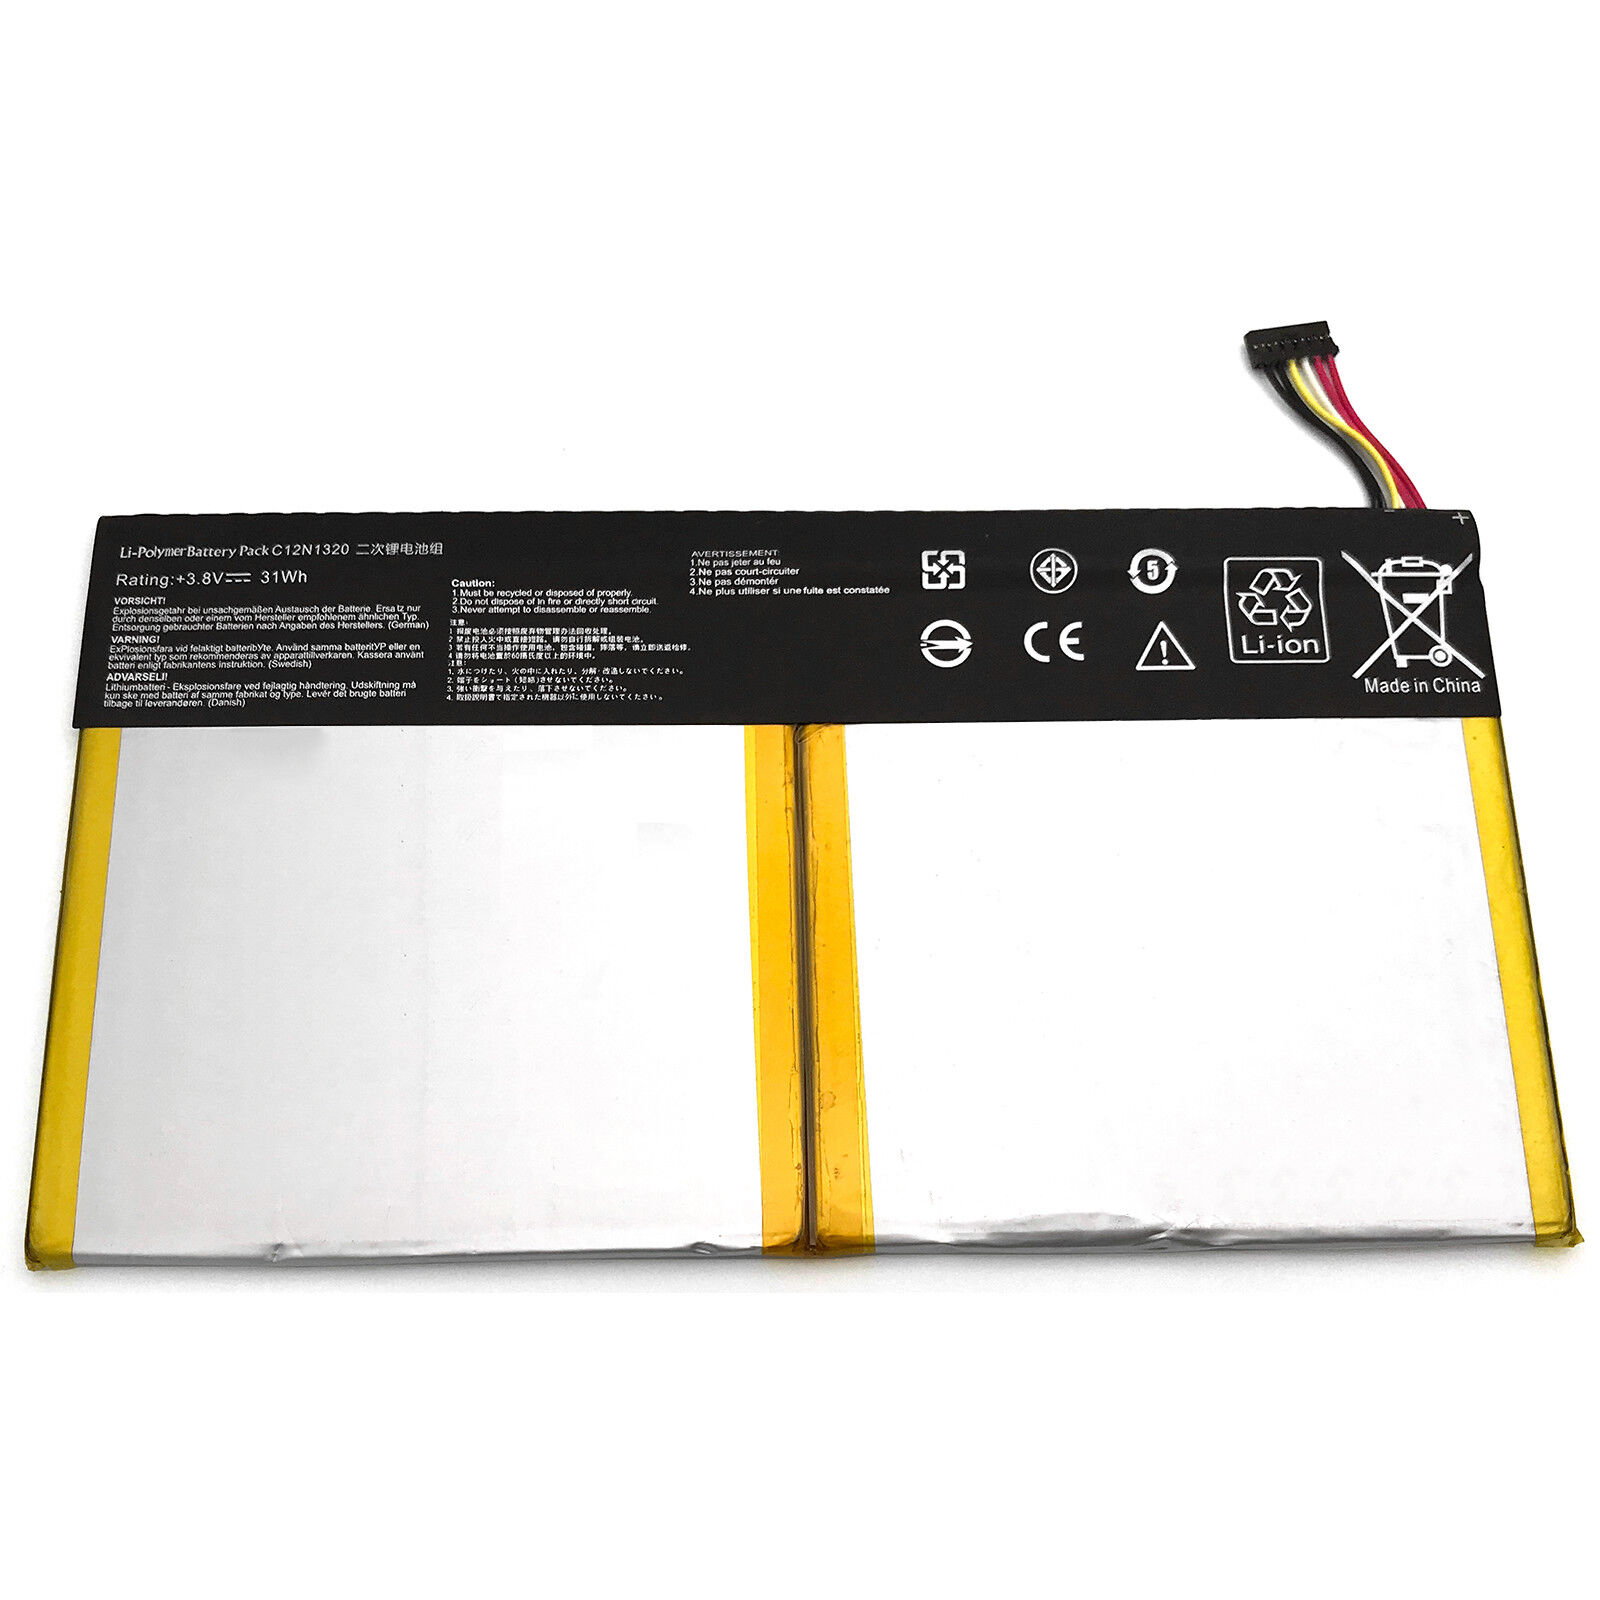 31Wh Battery For Asus Transformer Book T100T T100TA T101TA Series C12N1320 Unbranded Does Not Apply - фотография #2